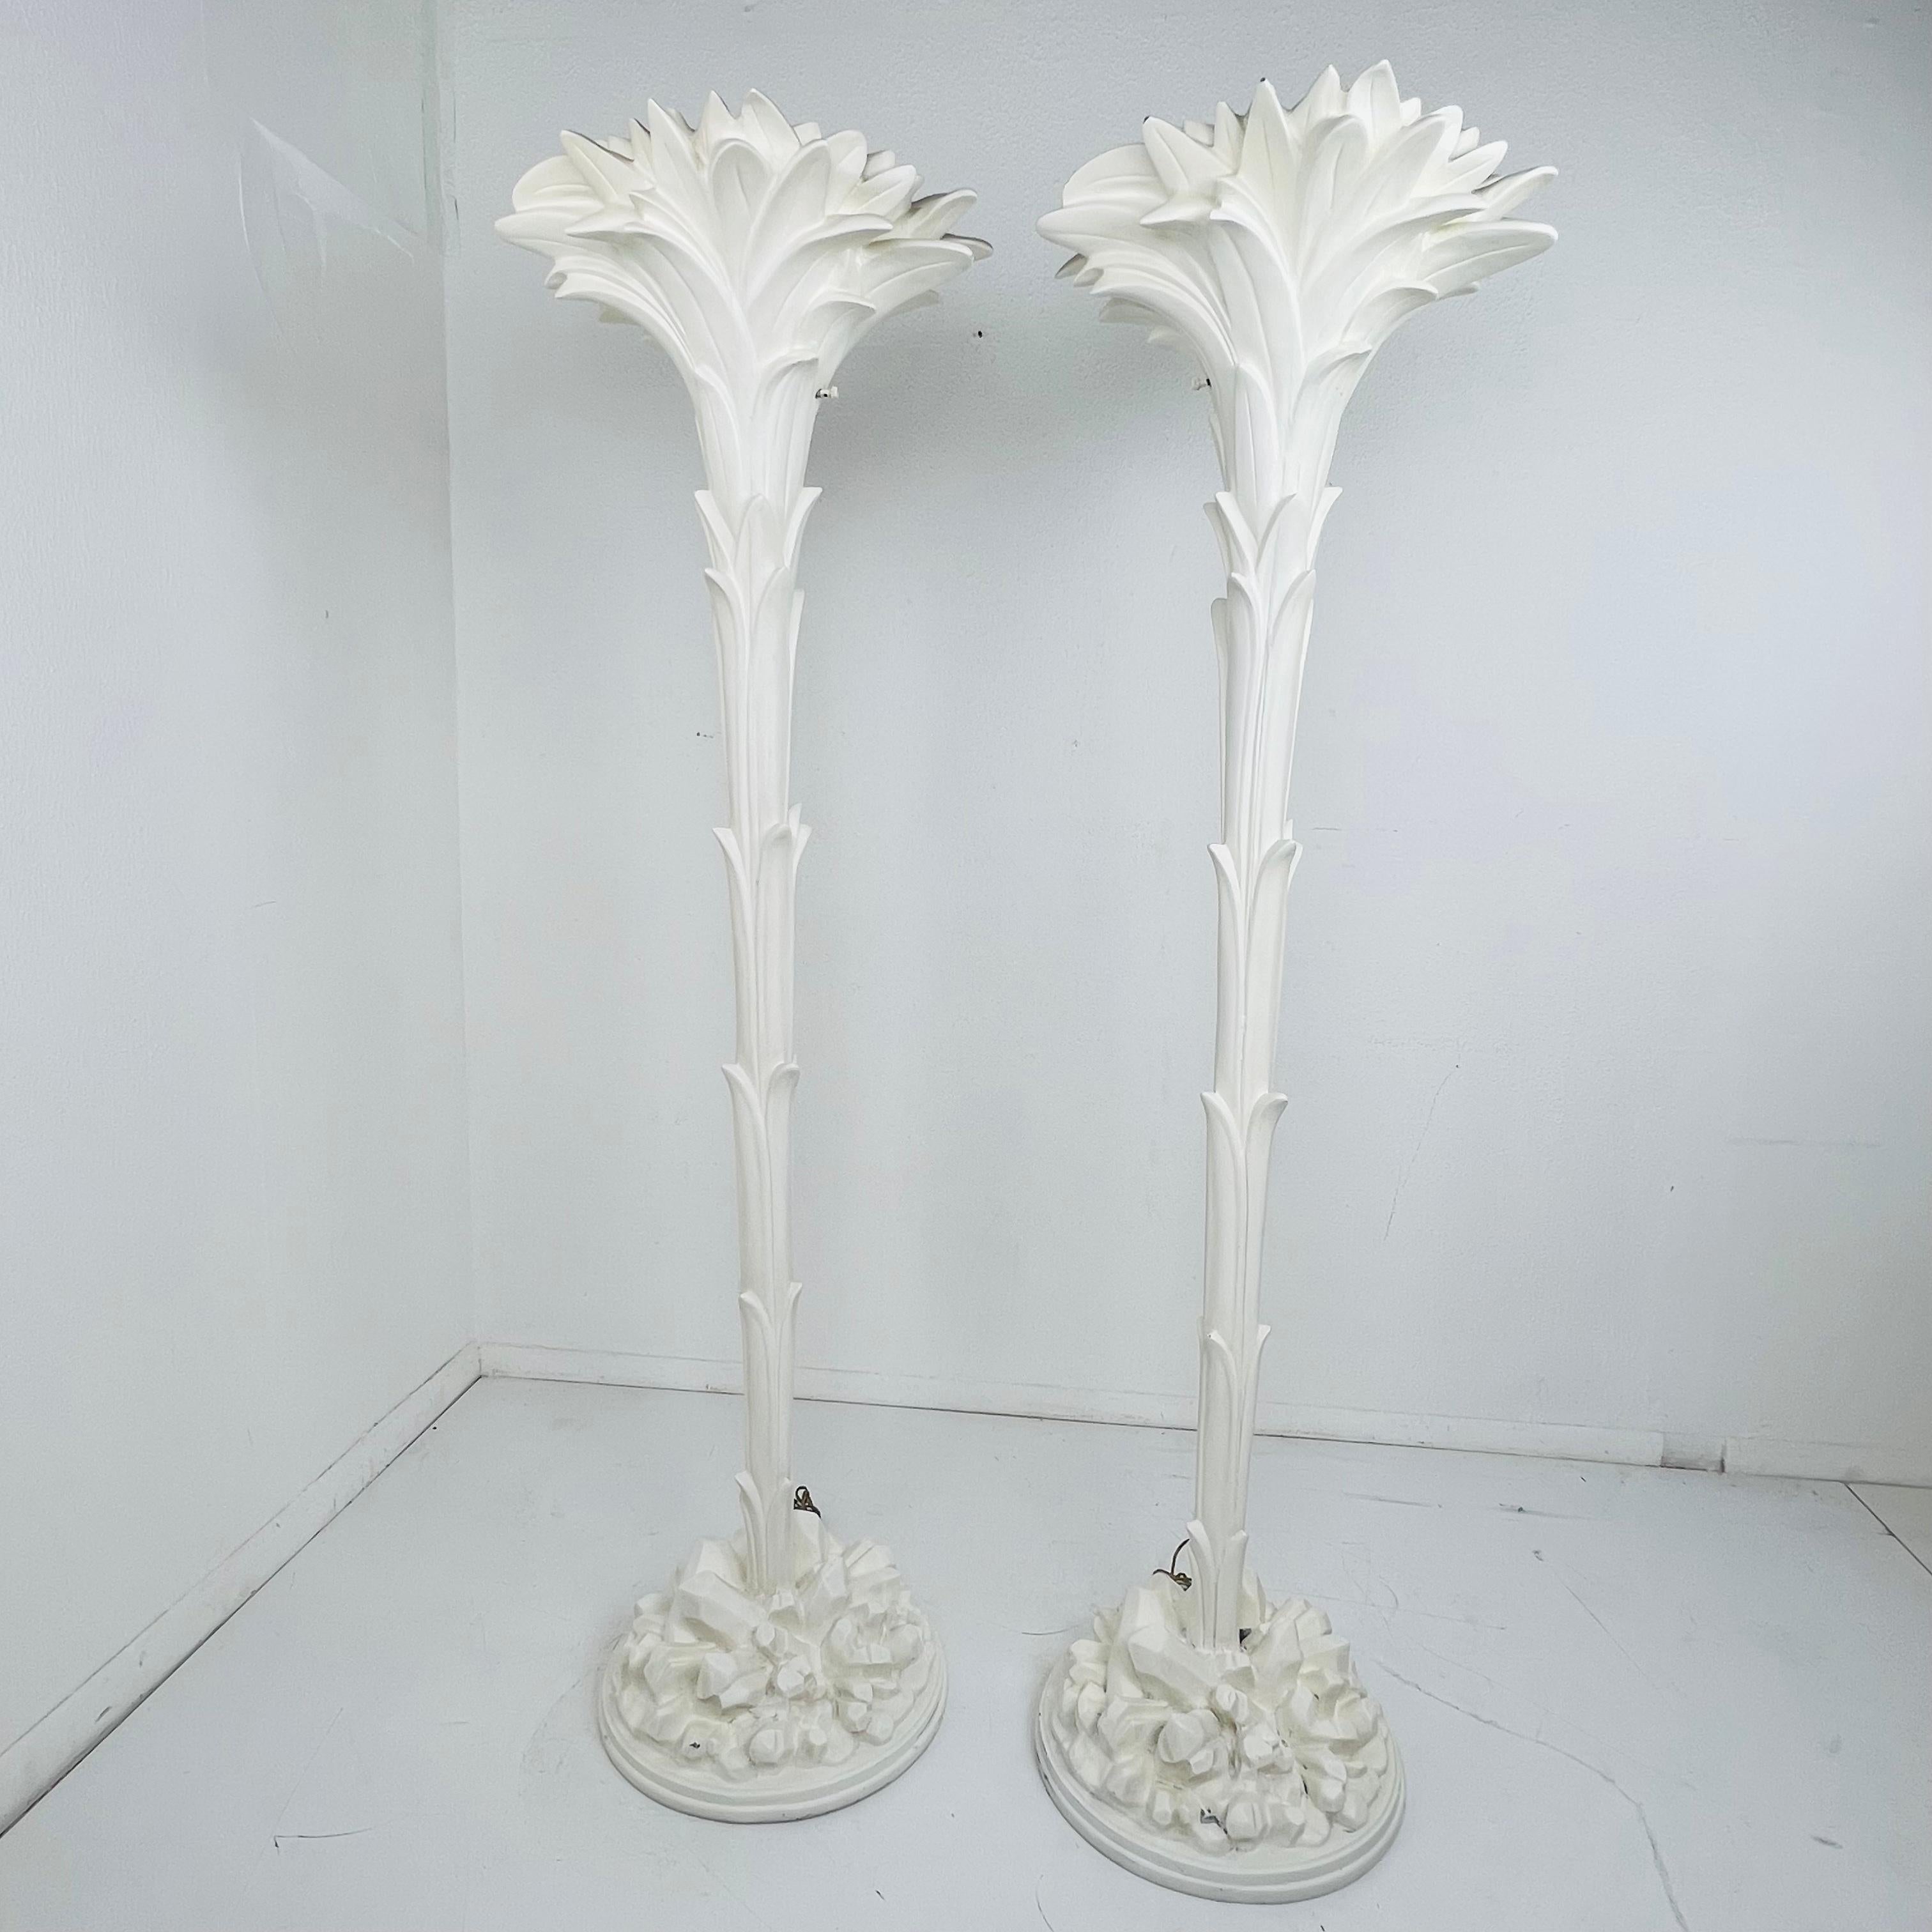 Stunning pair of 1970s palm leaf torchiere lamps in cast resin and white plaster, mounted on a white wooden base with styled crystals. Single light fitting with original switch. These Hollywood Regency style torchiere floor lamps are made after the